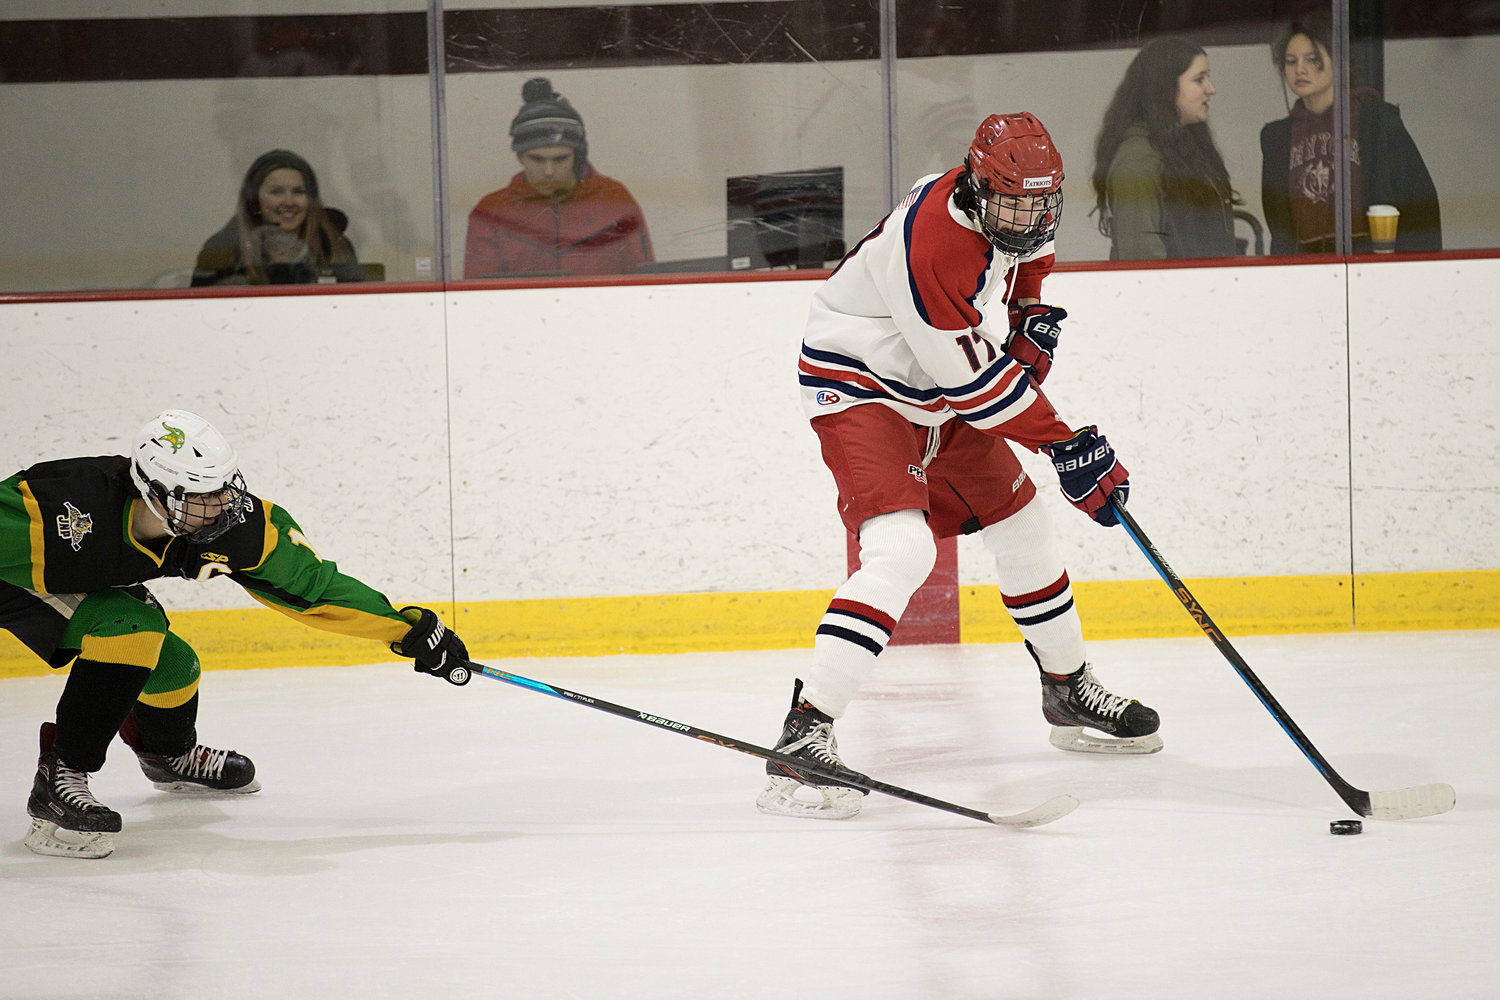 Dan Biello maneuvers the puck away from a North Smithfield defender.